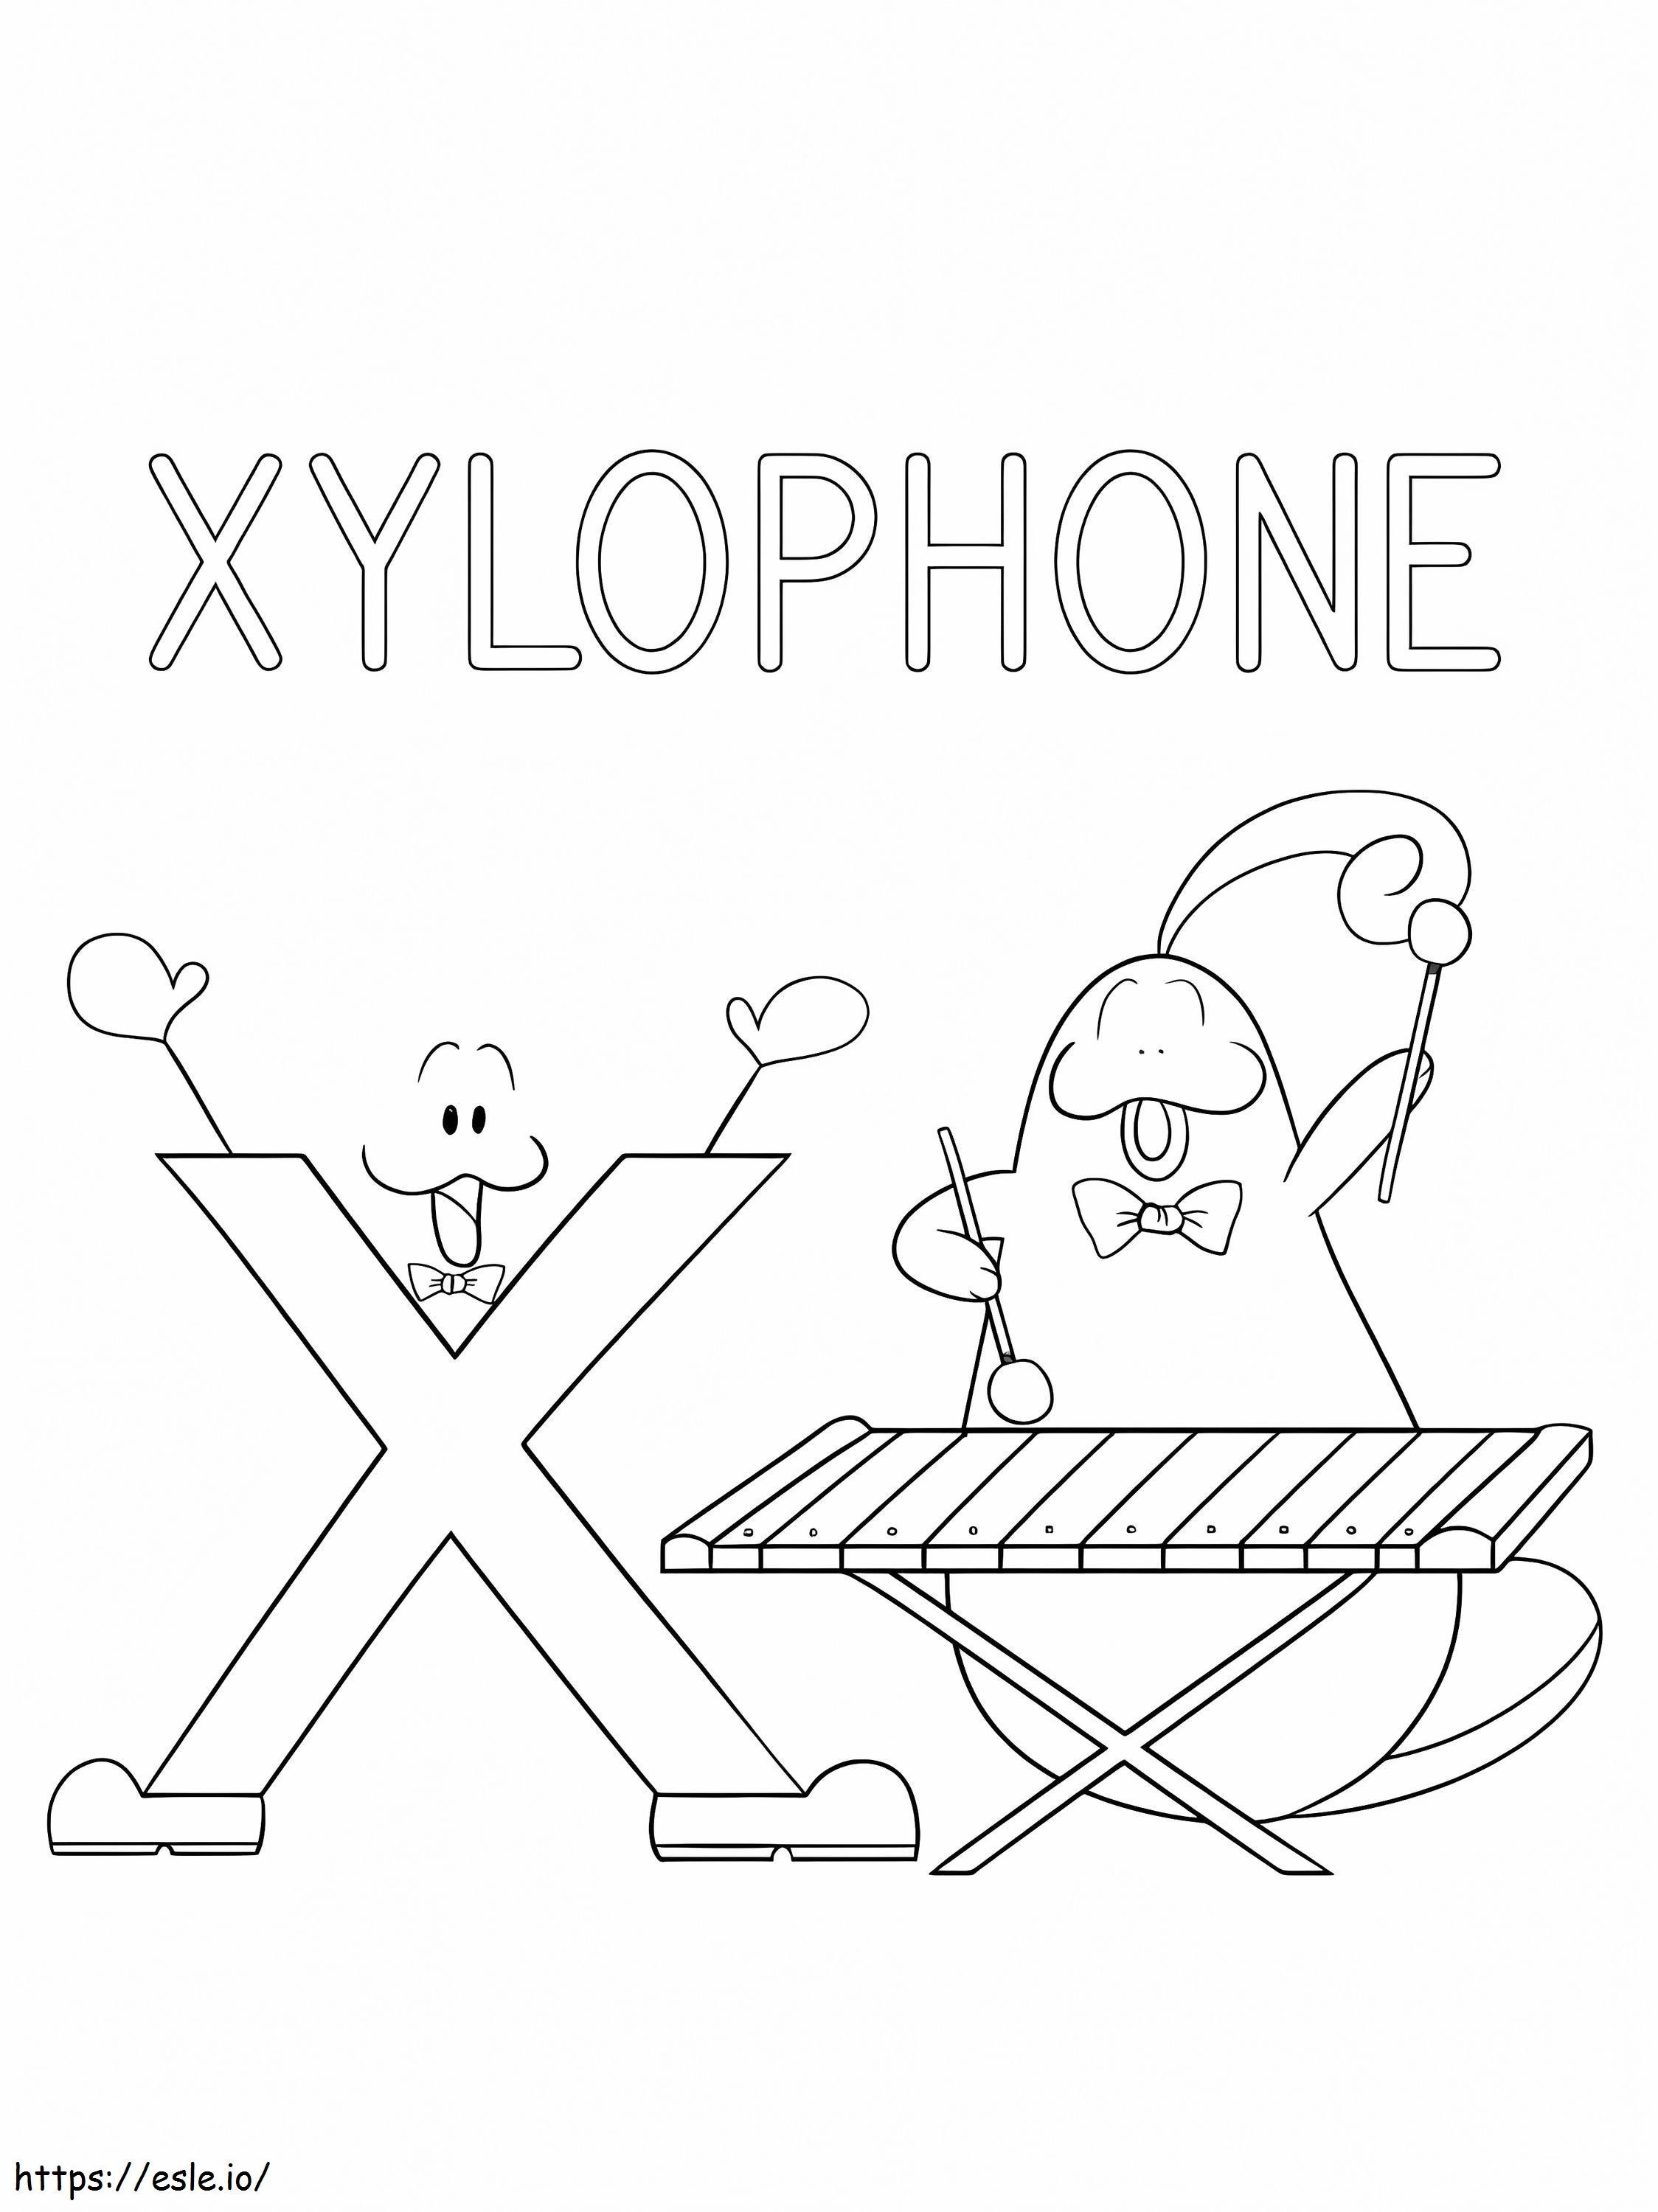 Xylophone Letter X 4 coloring page